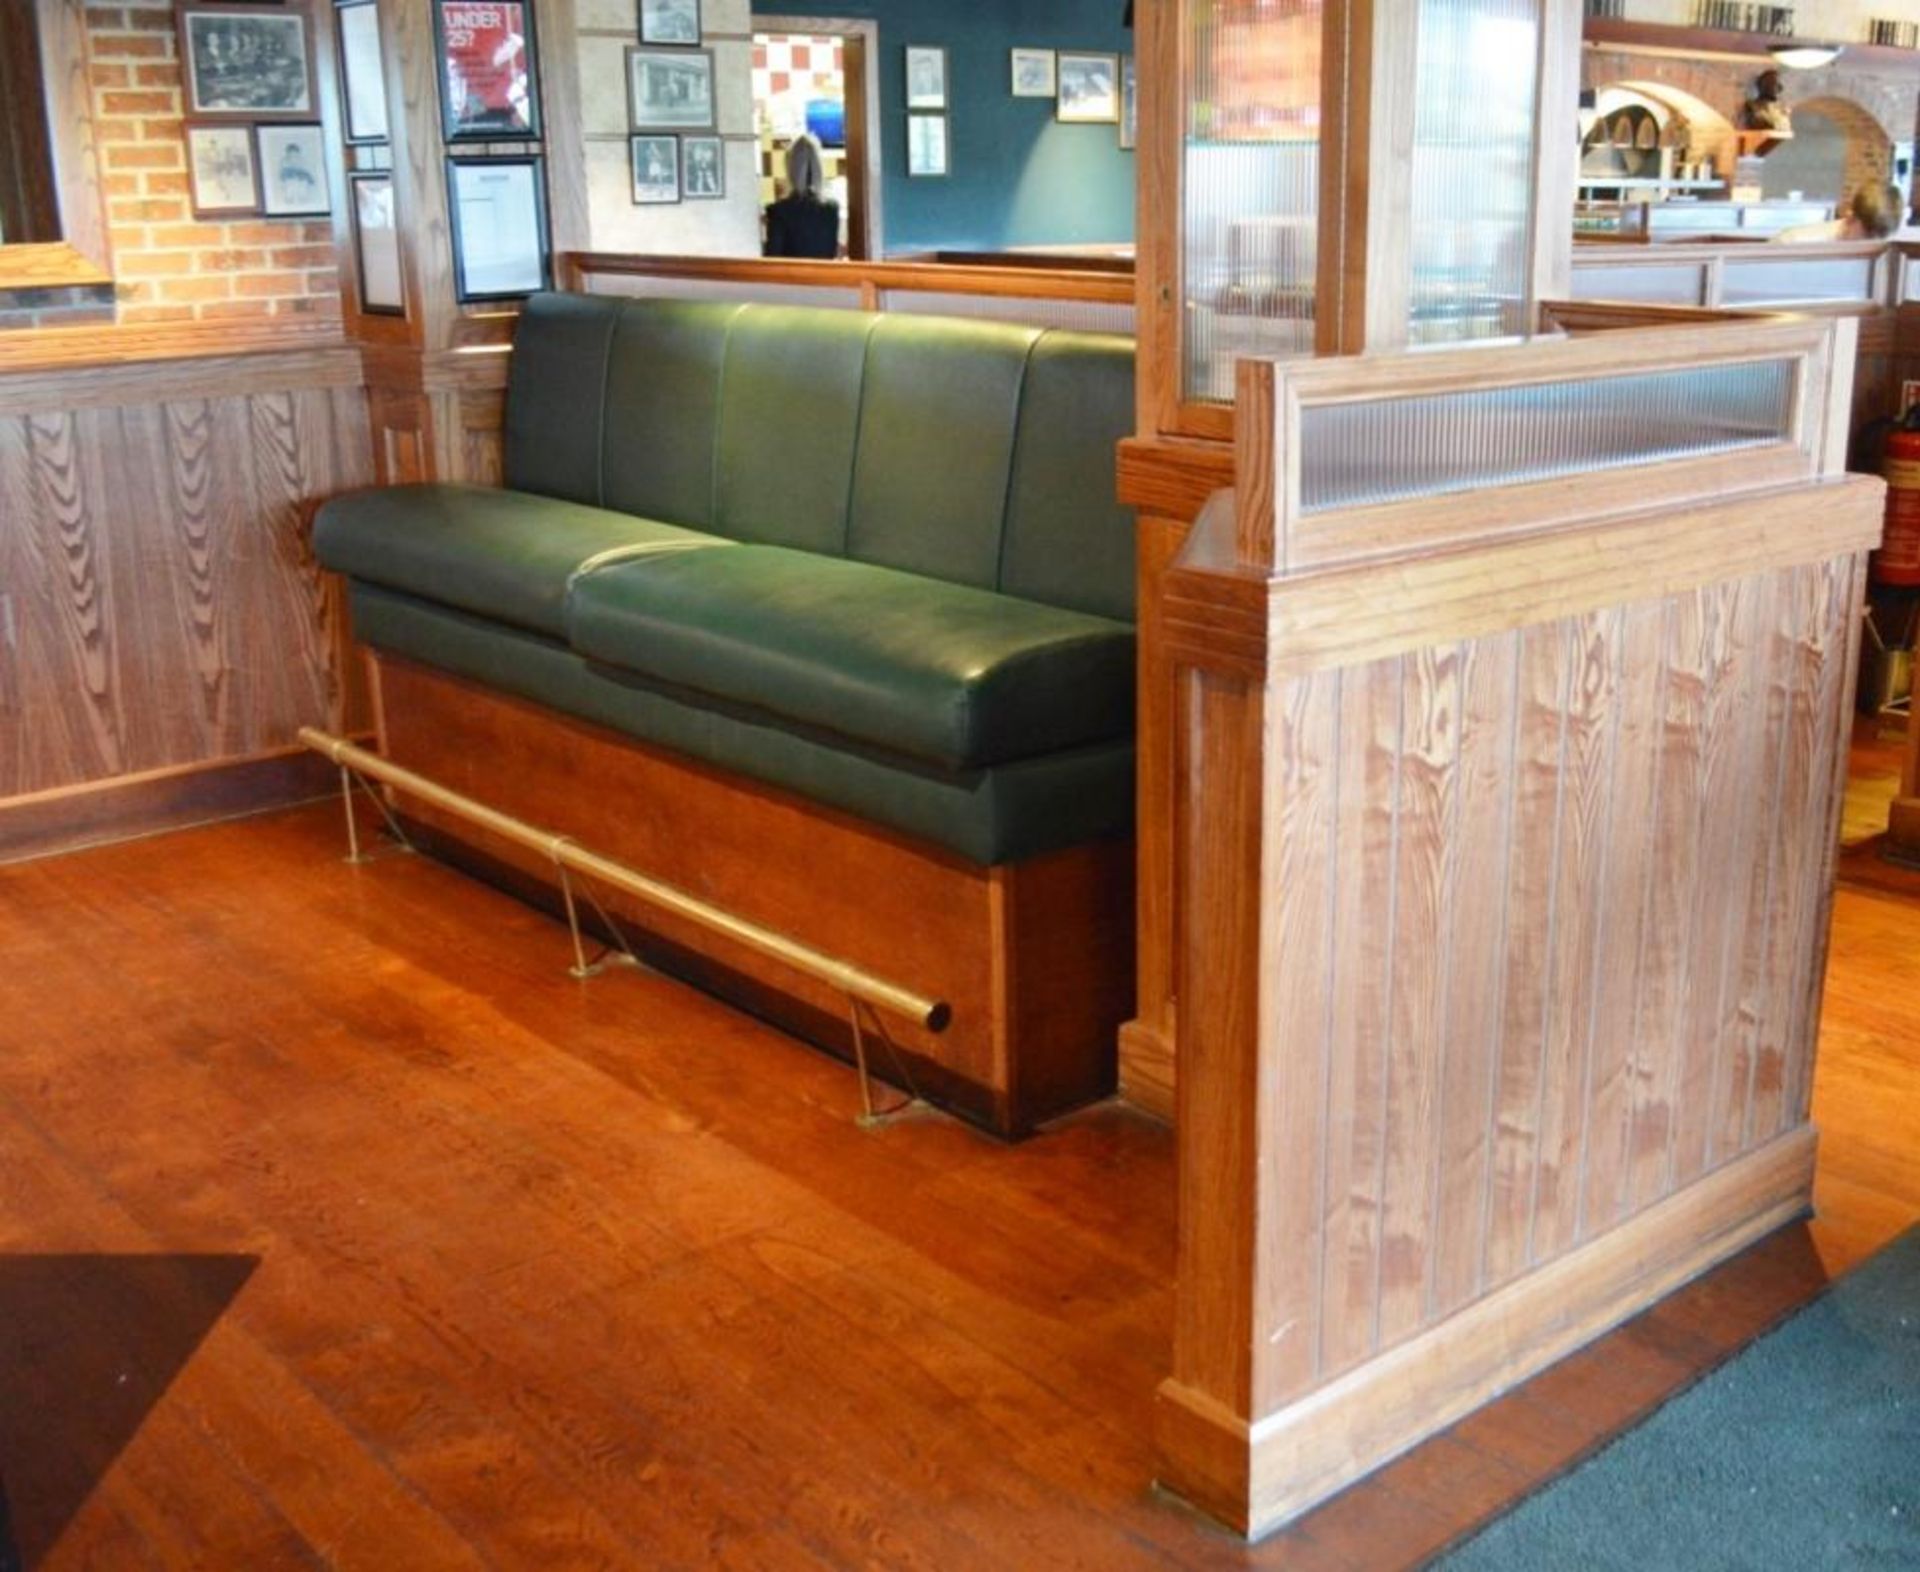 1 x Bar Restaurant Room Partition With Seating Bench, Pillar, Wine Cabinet and Foot Rest - Overall S - Image 10 of 21